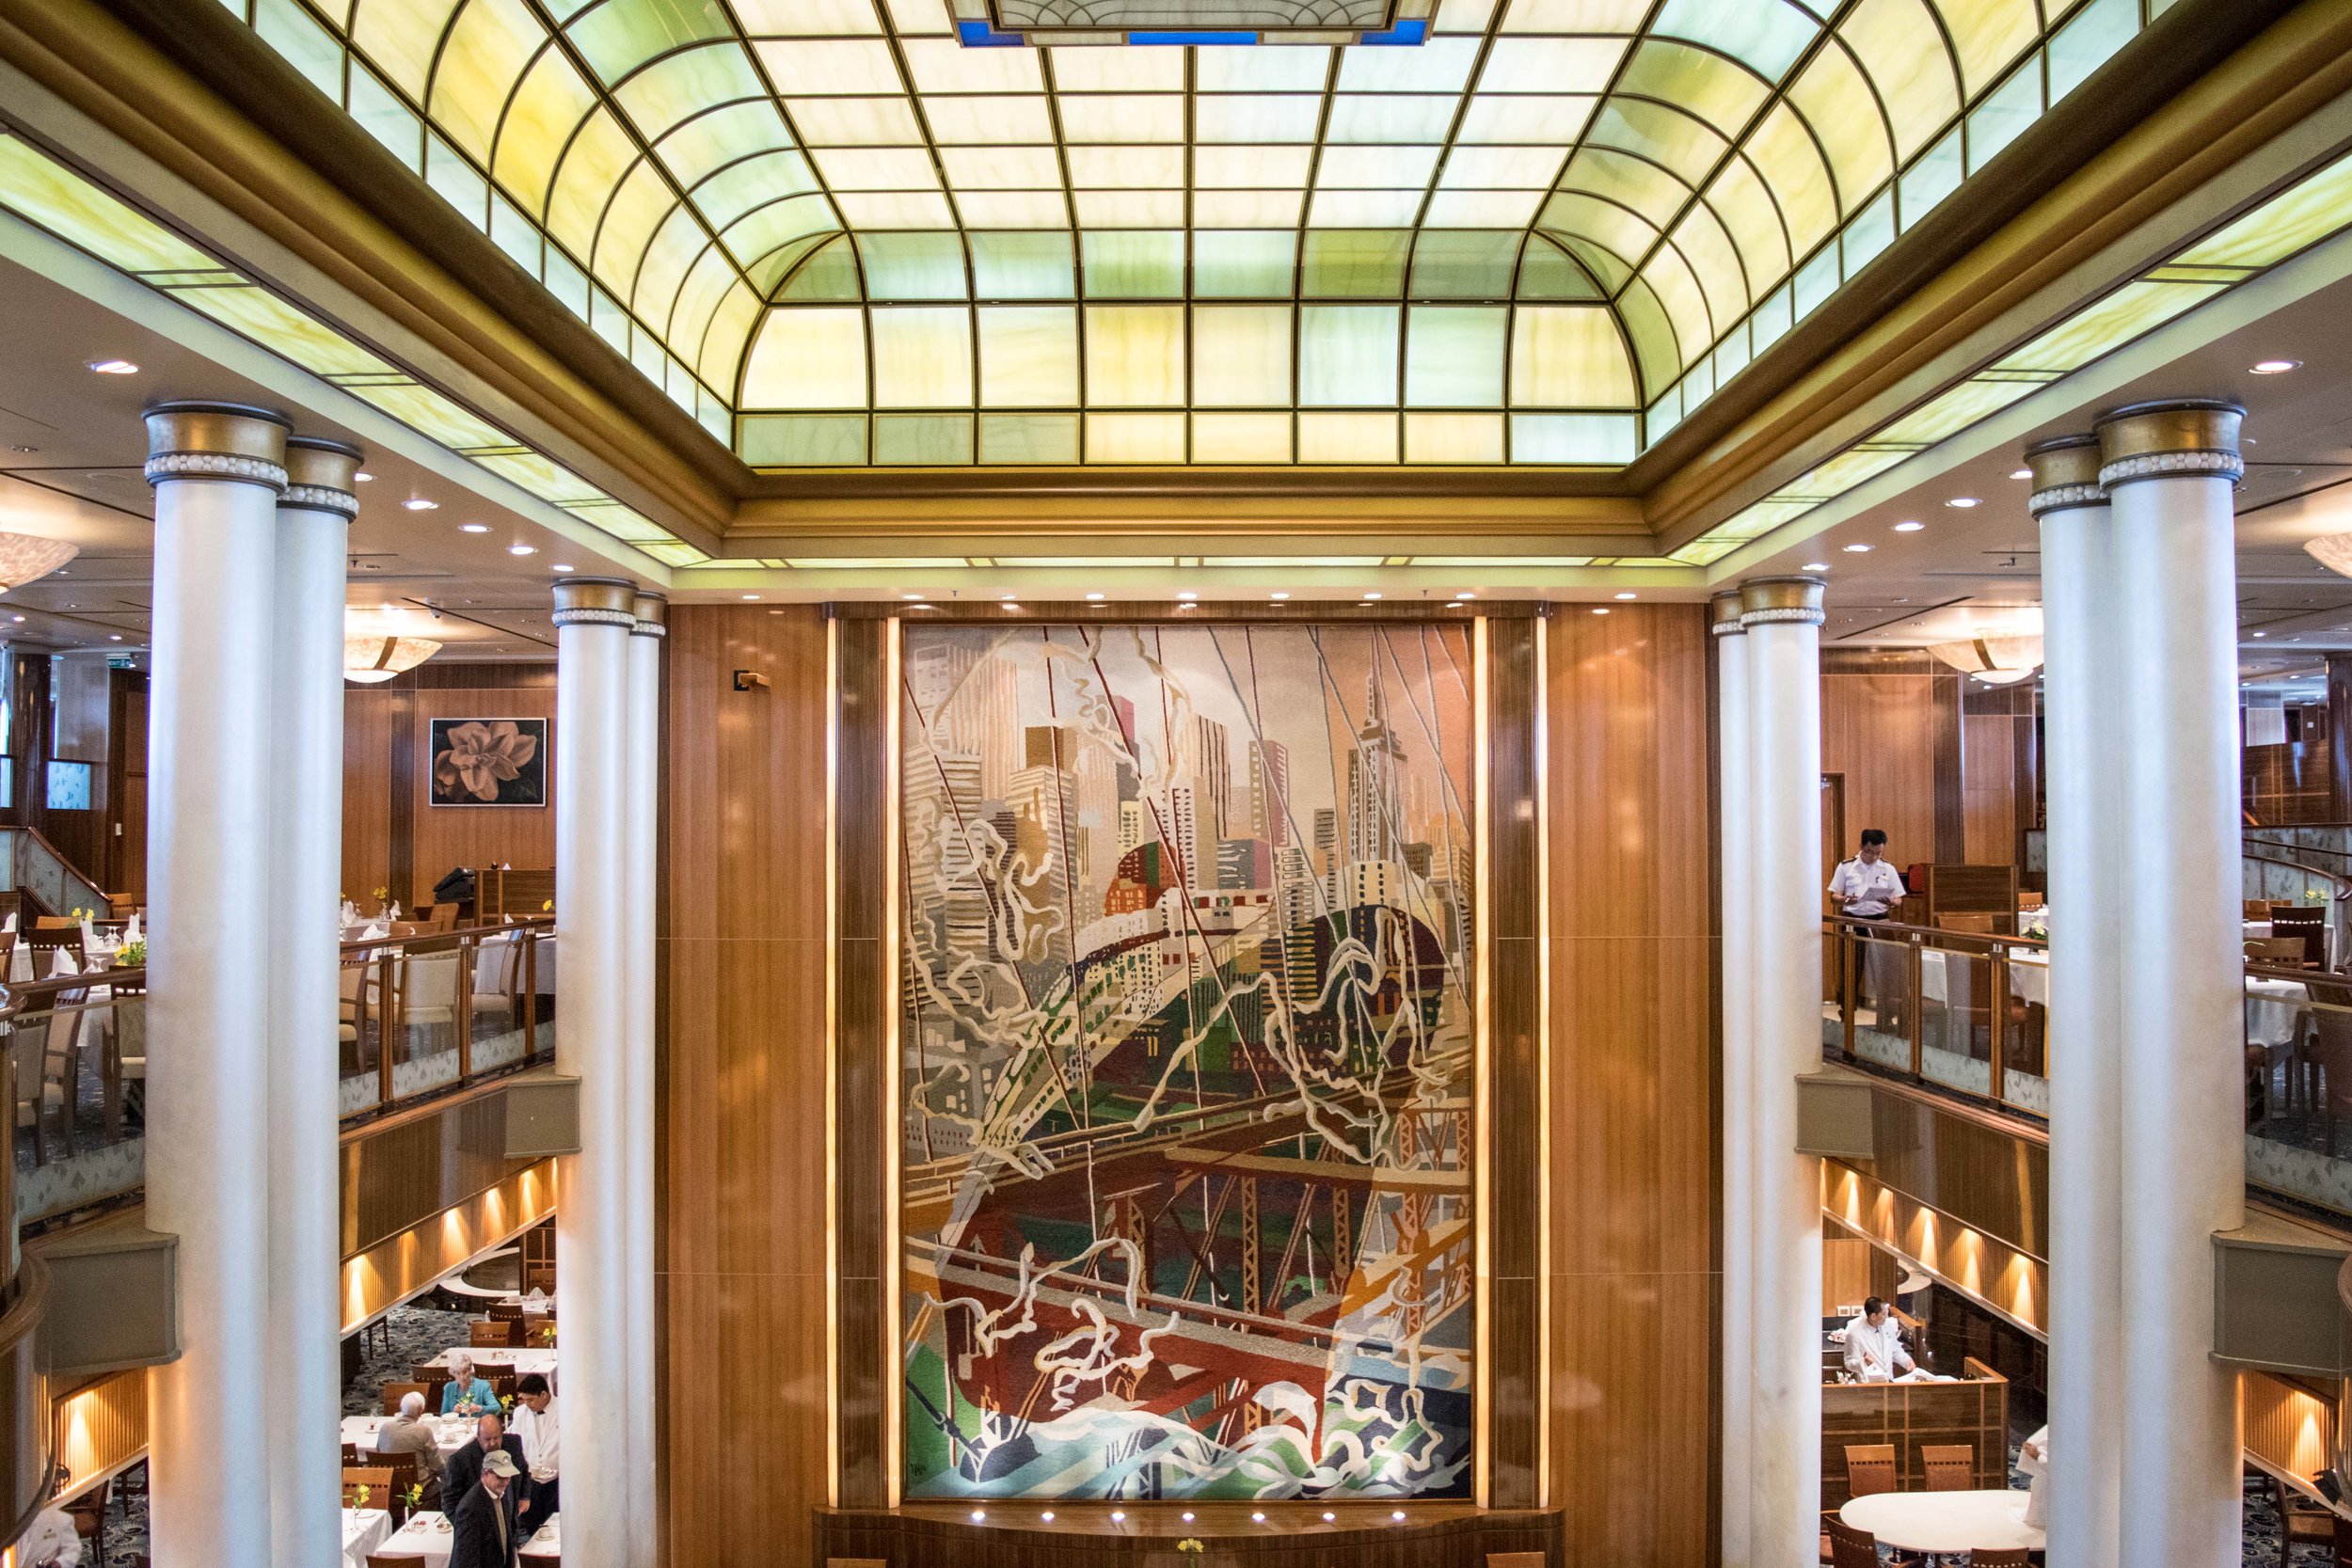 11 Reasons Why You Should Absolutely Consider a Voyage on the Queen Mary 2